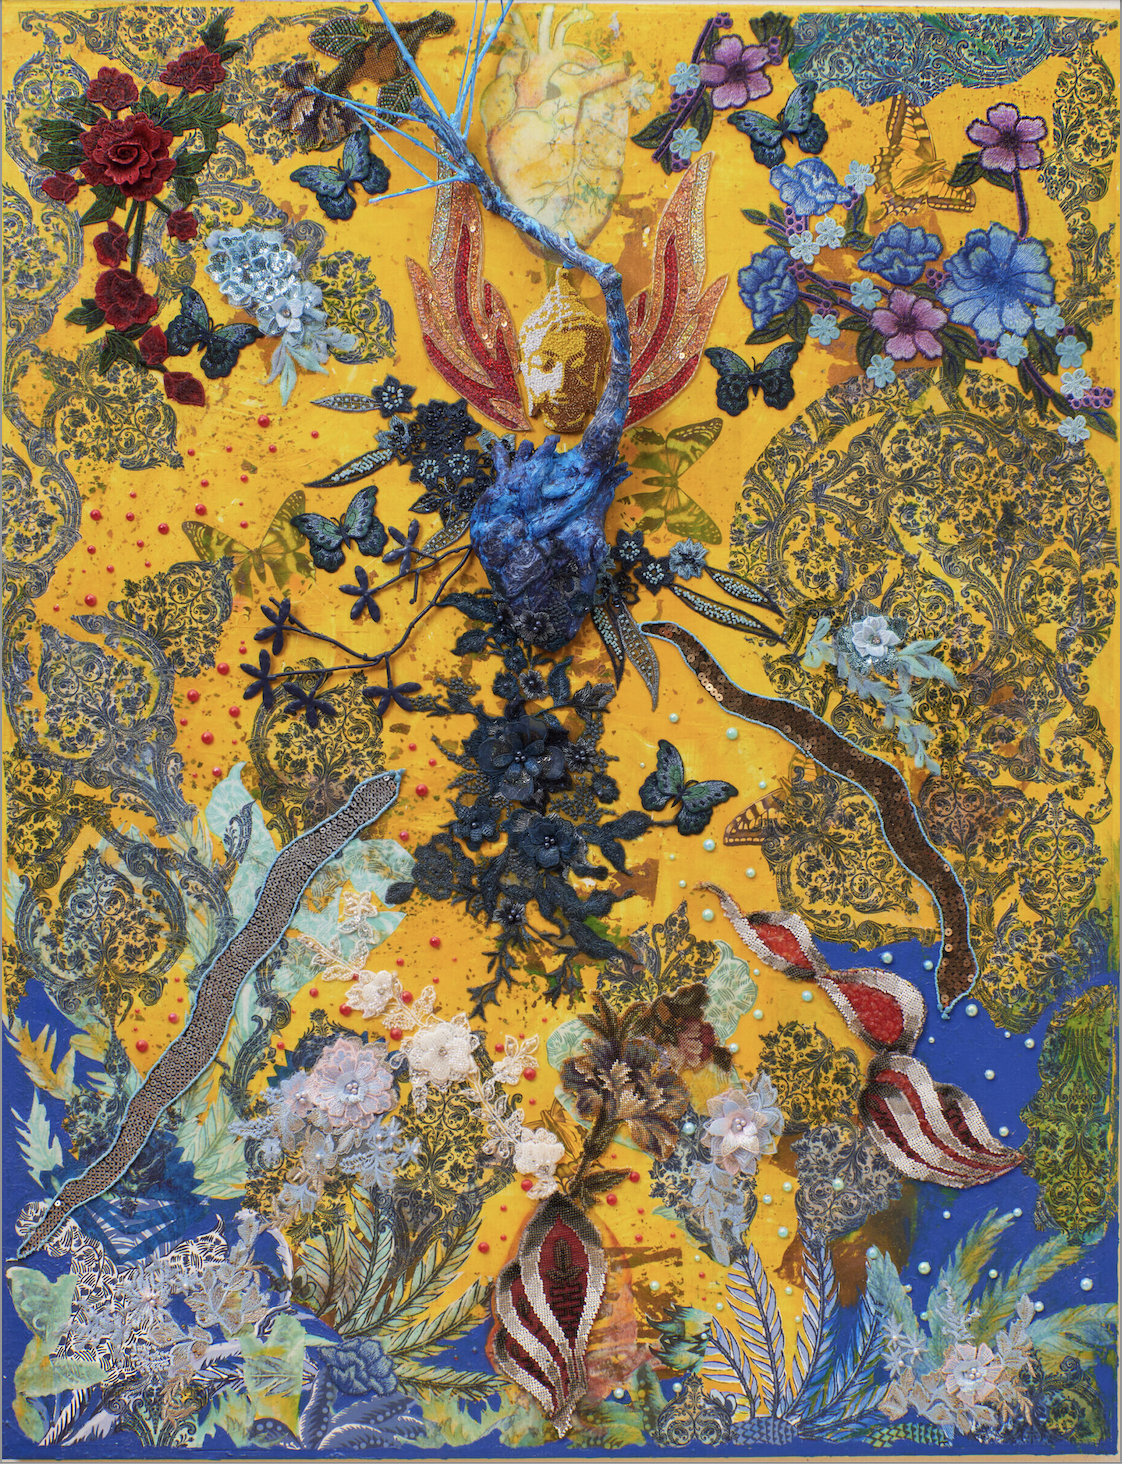 On a yellow ground, a variety of ornaments and materials form a colorful collage of a dreamy garden. The materials include sequins in the shape of snakes and flowers, embroidery, cut-out depictions of butterflies and plants, and the head of Gautama Buddha made from sequins.